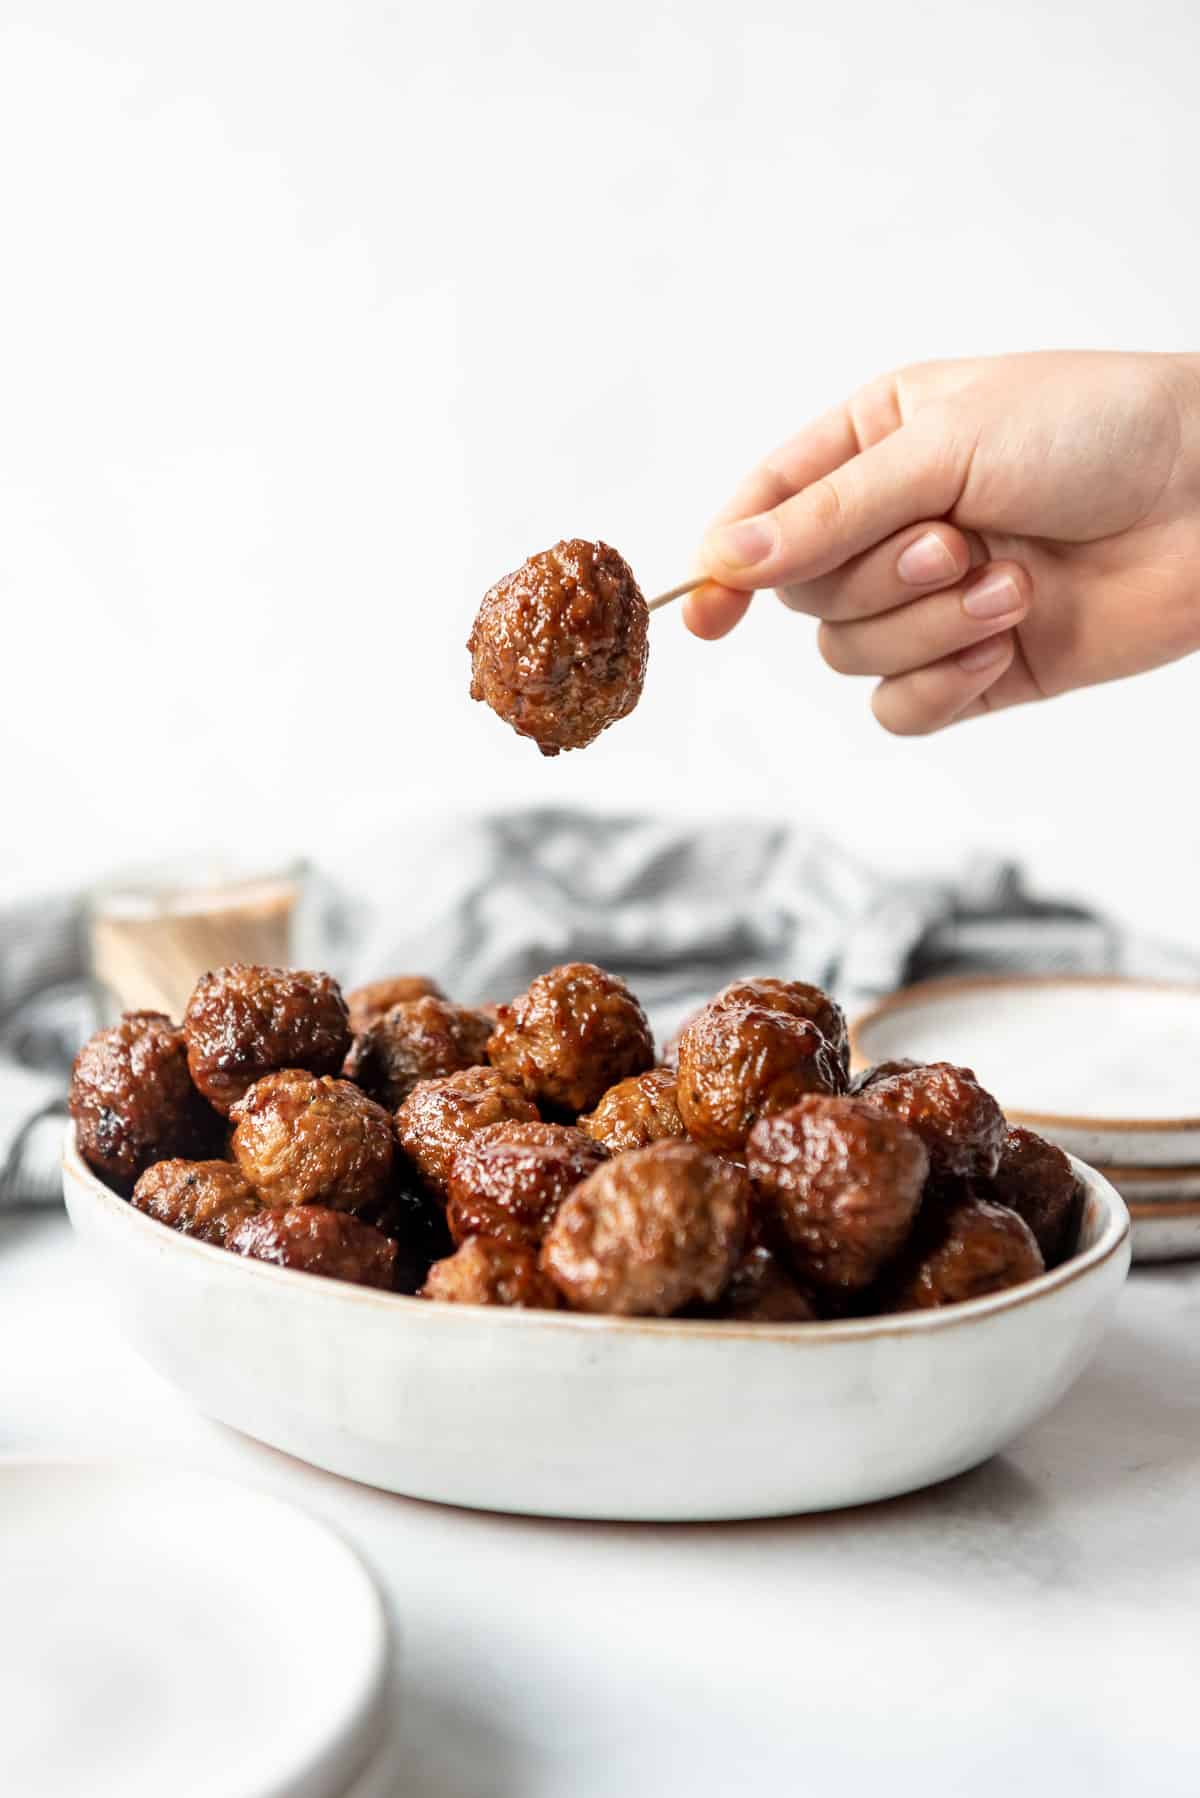 A hand lifting a grape jelly meatball on a toothpick over a bowl of the meatballs.